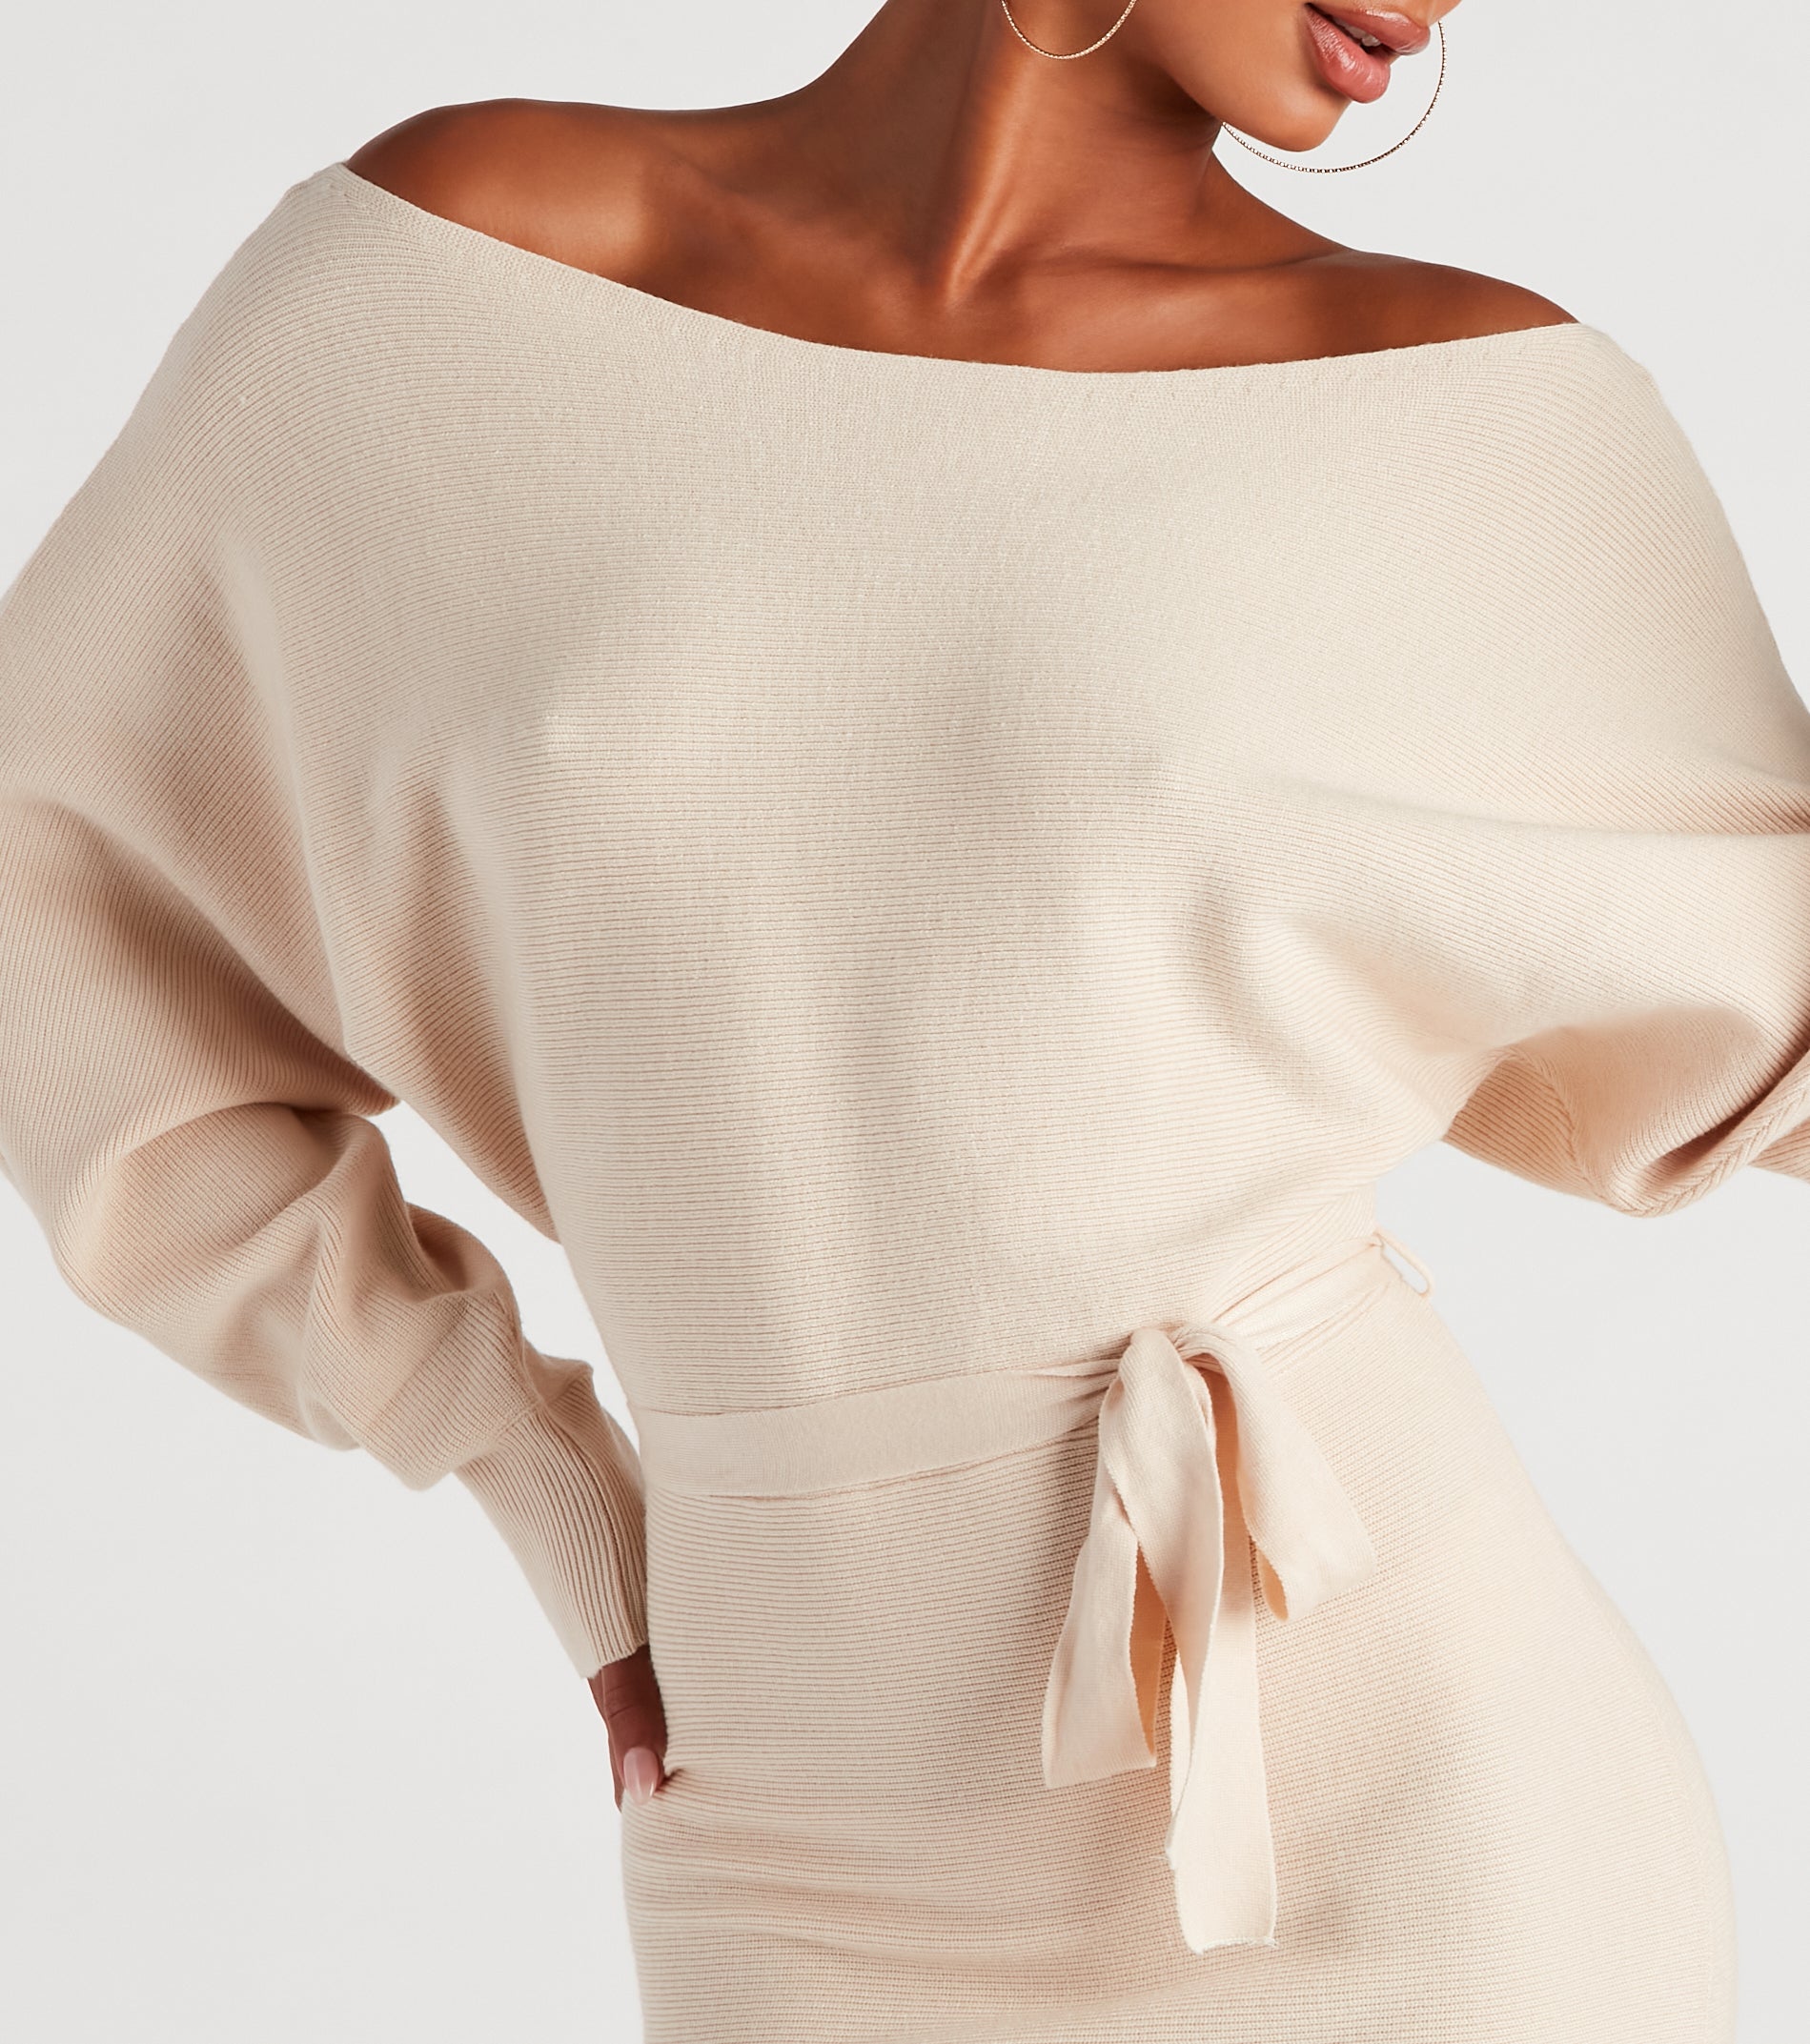 Cold Classic Dolman Sleeve Belted Sweater Dress